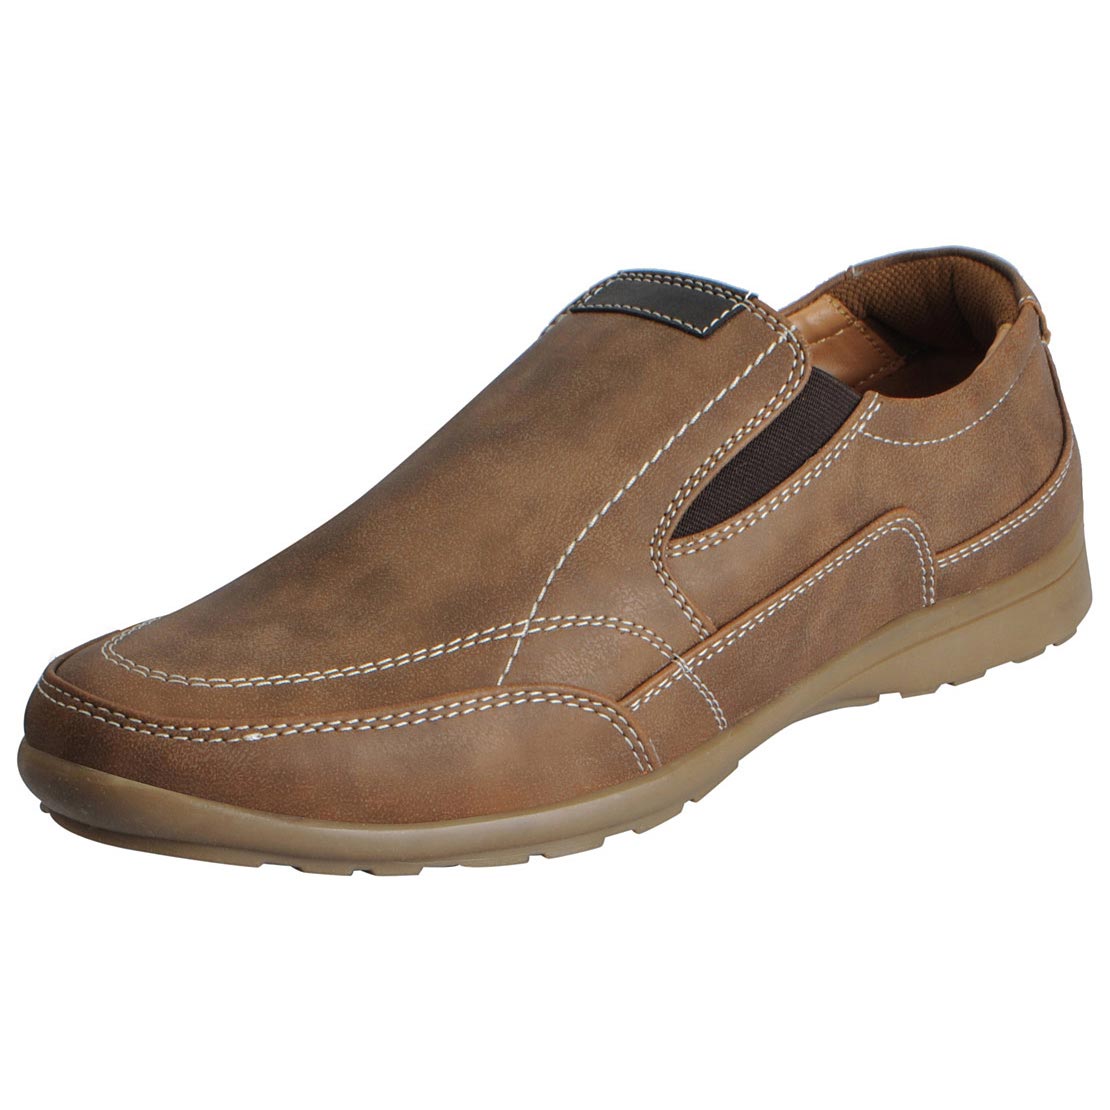 Buy Bata Brown Men's Casual Loafers Online @ ₹1139 from ShopClues